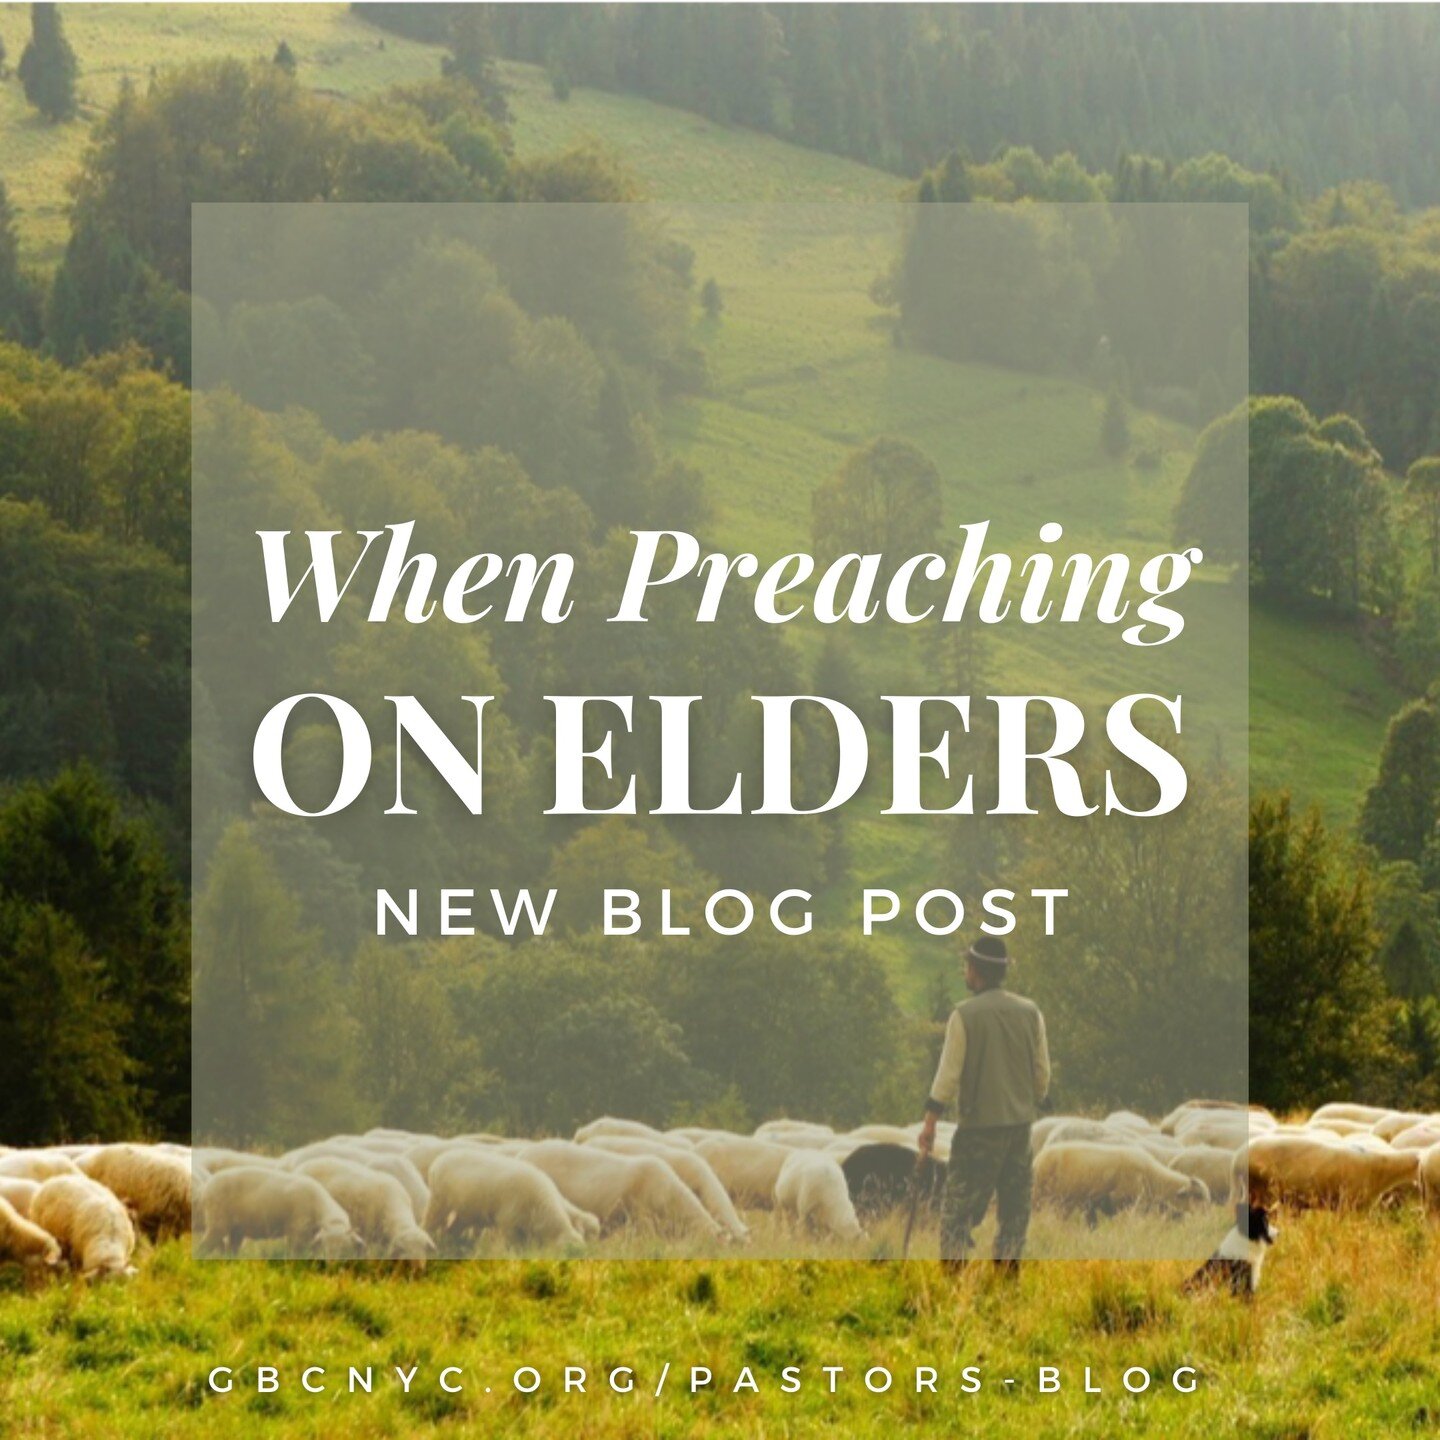 Ever wonder what is often under-emphasized when preaching on elders? Here's the perspective of 16 faithful pastors, including a missionary in Croatia.

Link: www.gbcnyc.org/pastors-blog